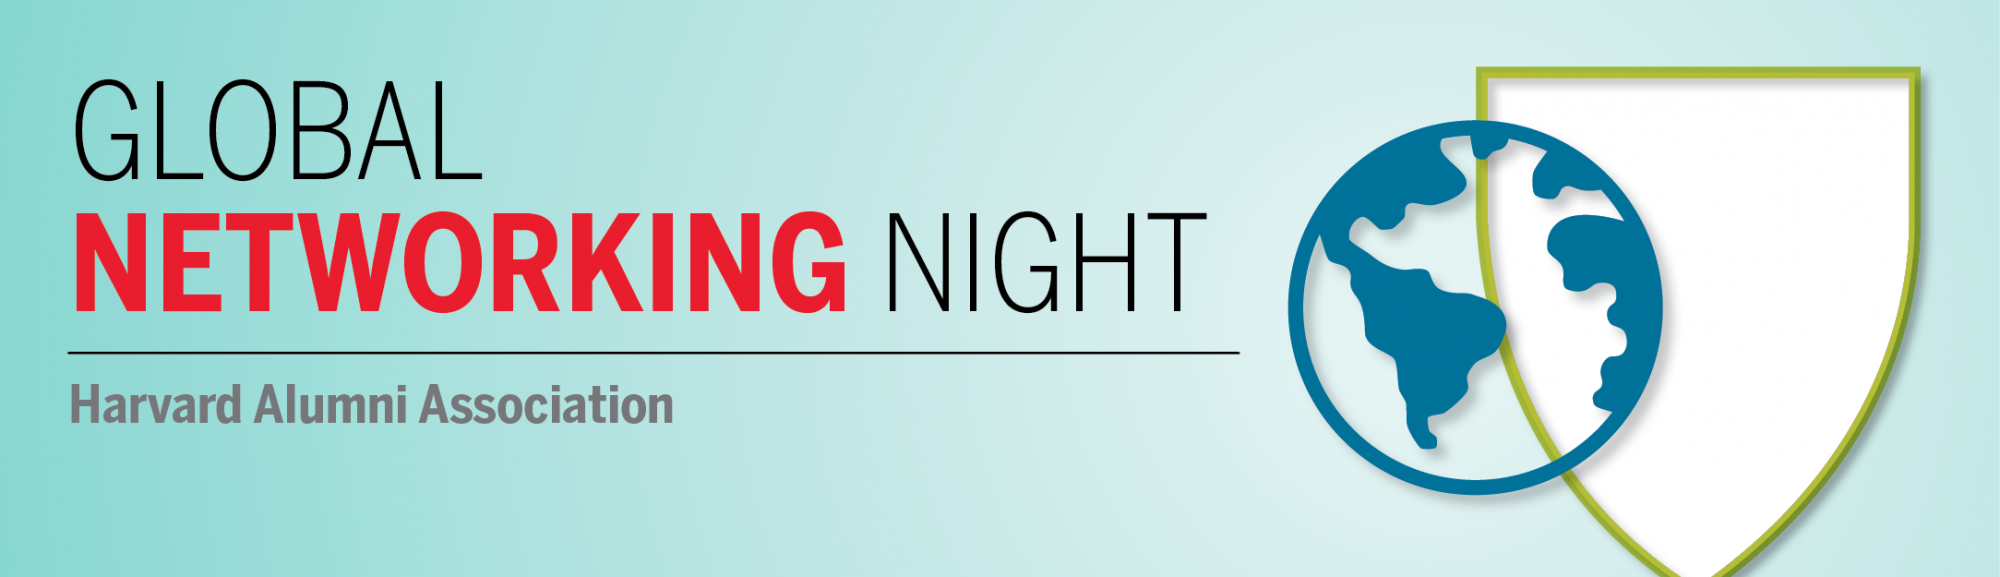 Global Networking Night banner